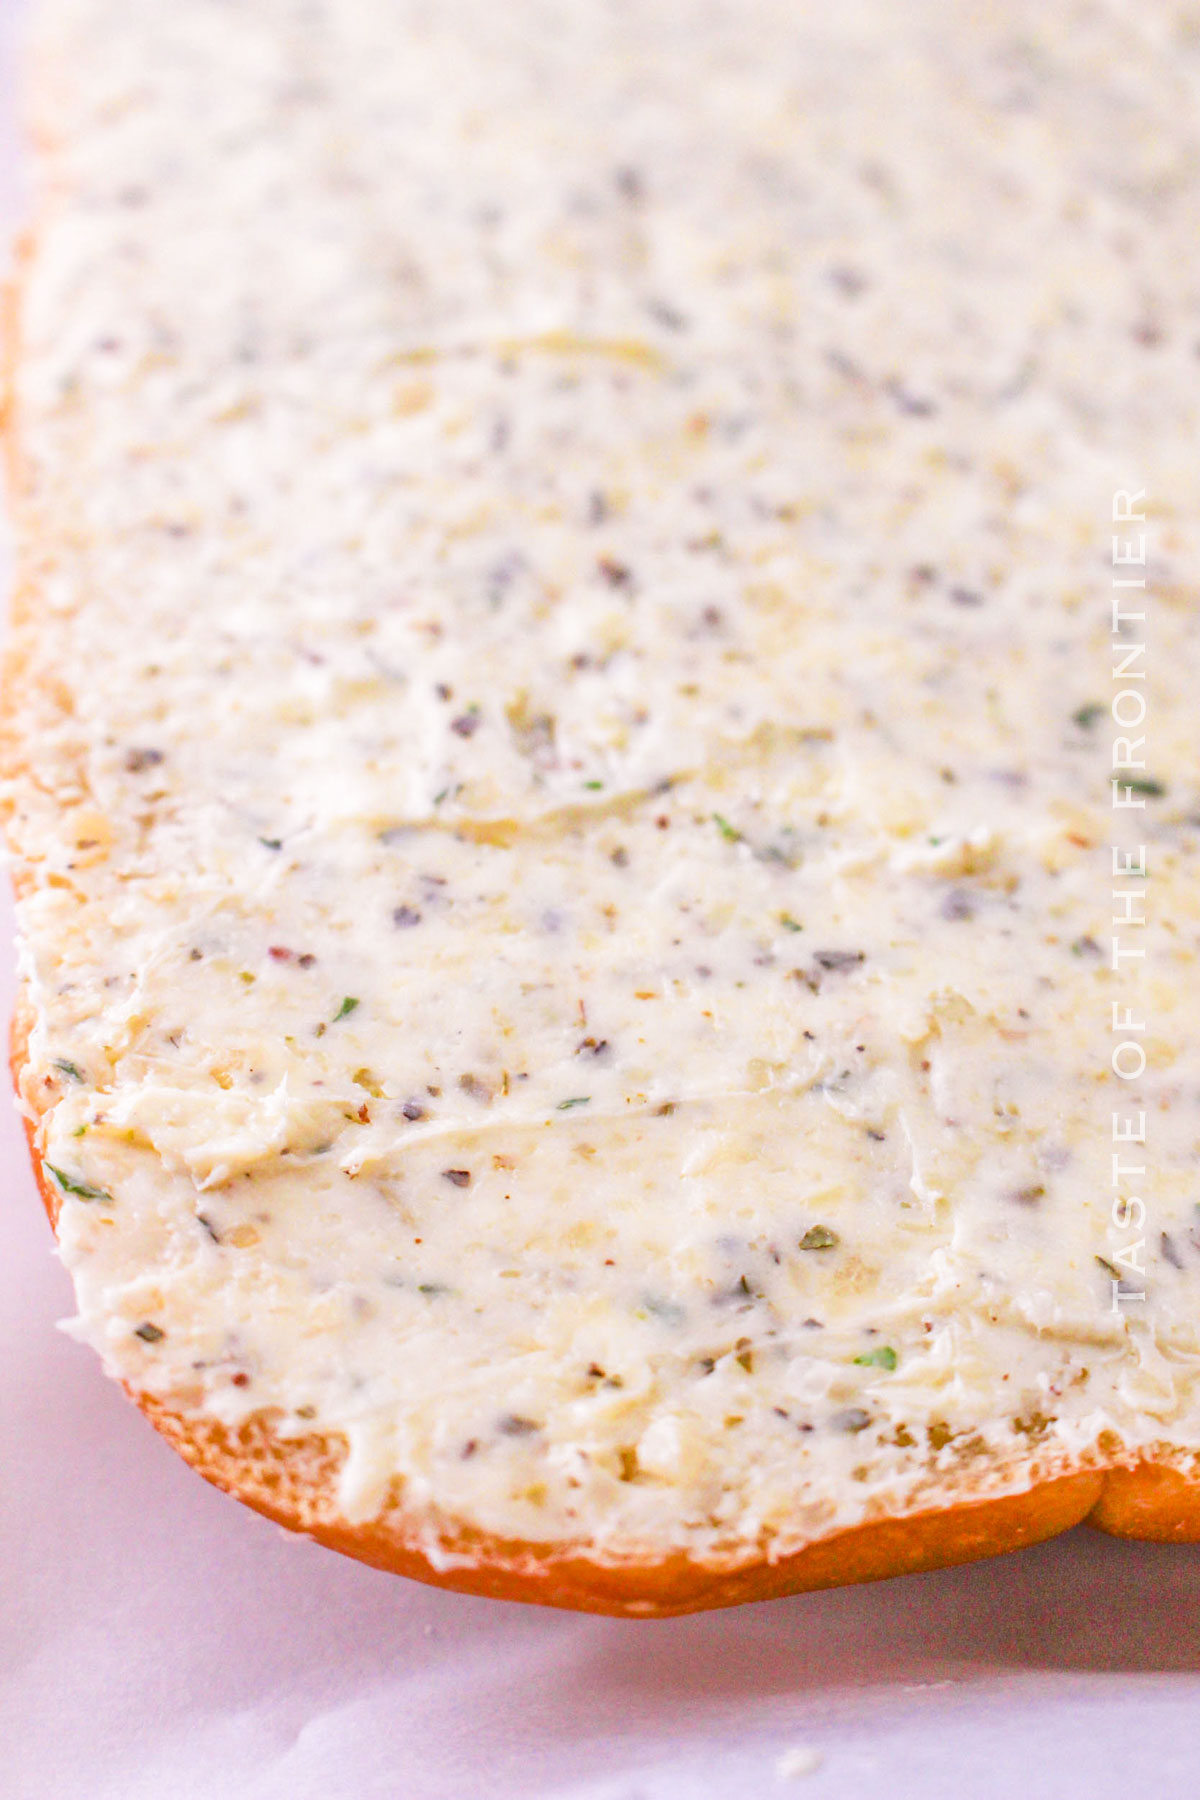 butter and parmesan cheese spread